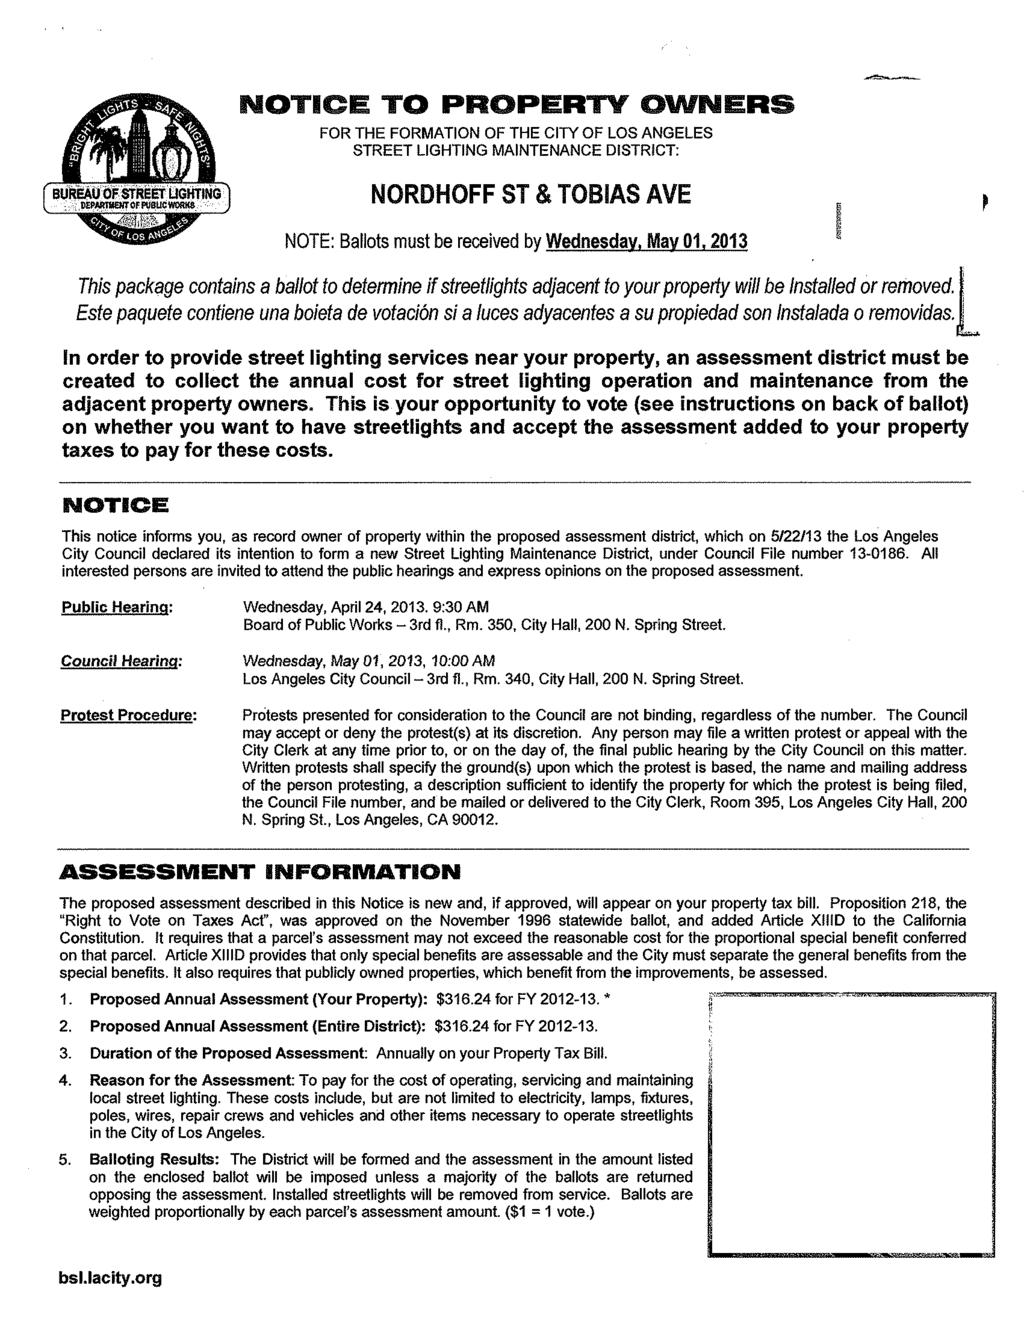 emmiss^ NOTICE TO PROPERTY OWNERS FOR THE FORMATION OF THE CITY OF LOS ANGELES STREET LIGHTING MAINTENANCE DISTRICT: NORDHOFF ST & TOBIAS AVE NOTE: Ballots must be received by Wednesday, May 01.